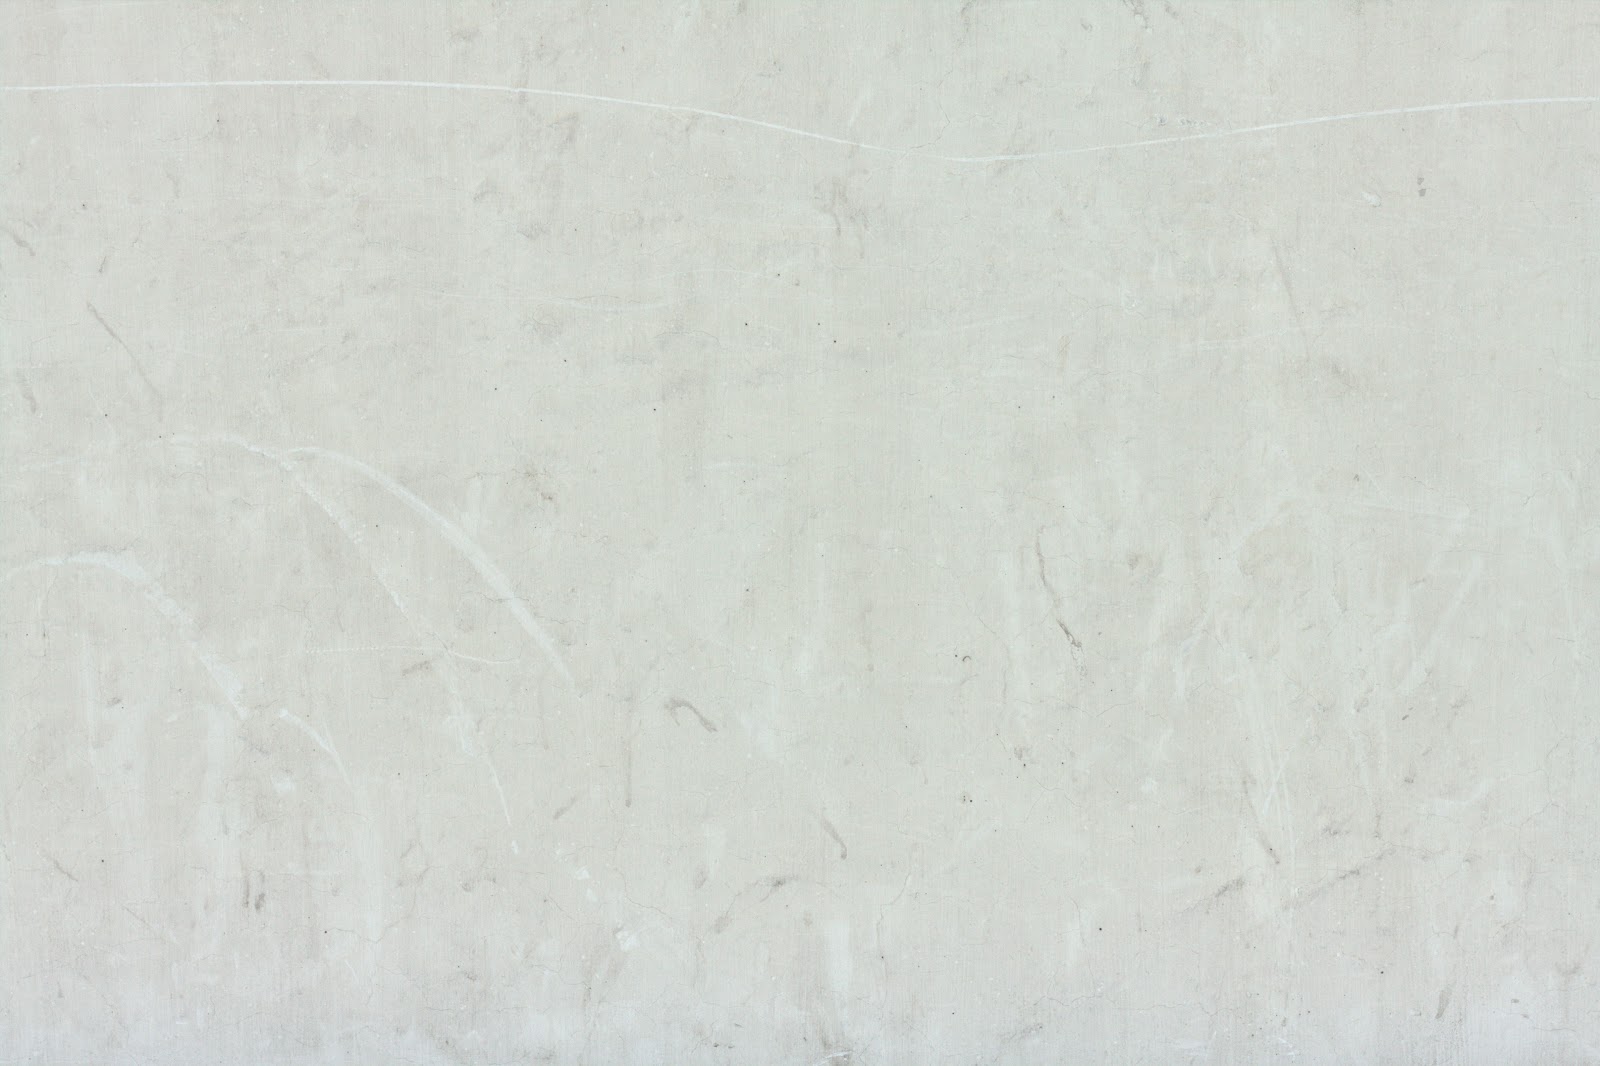 High Resolution Textures Concrete Wall Smooth White Grunge Texture 4770x3178